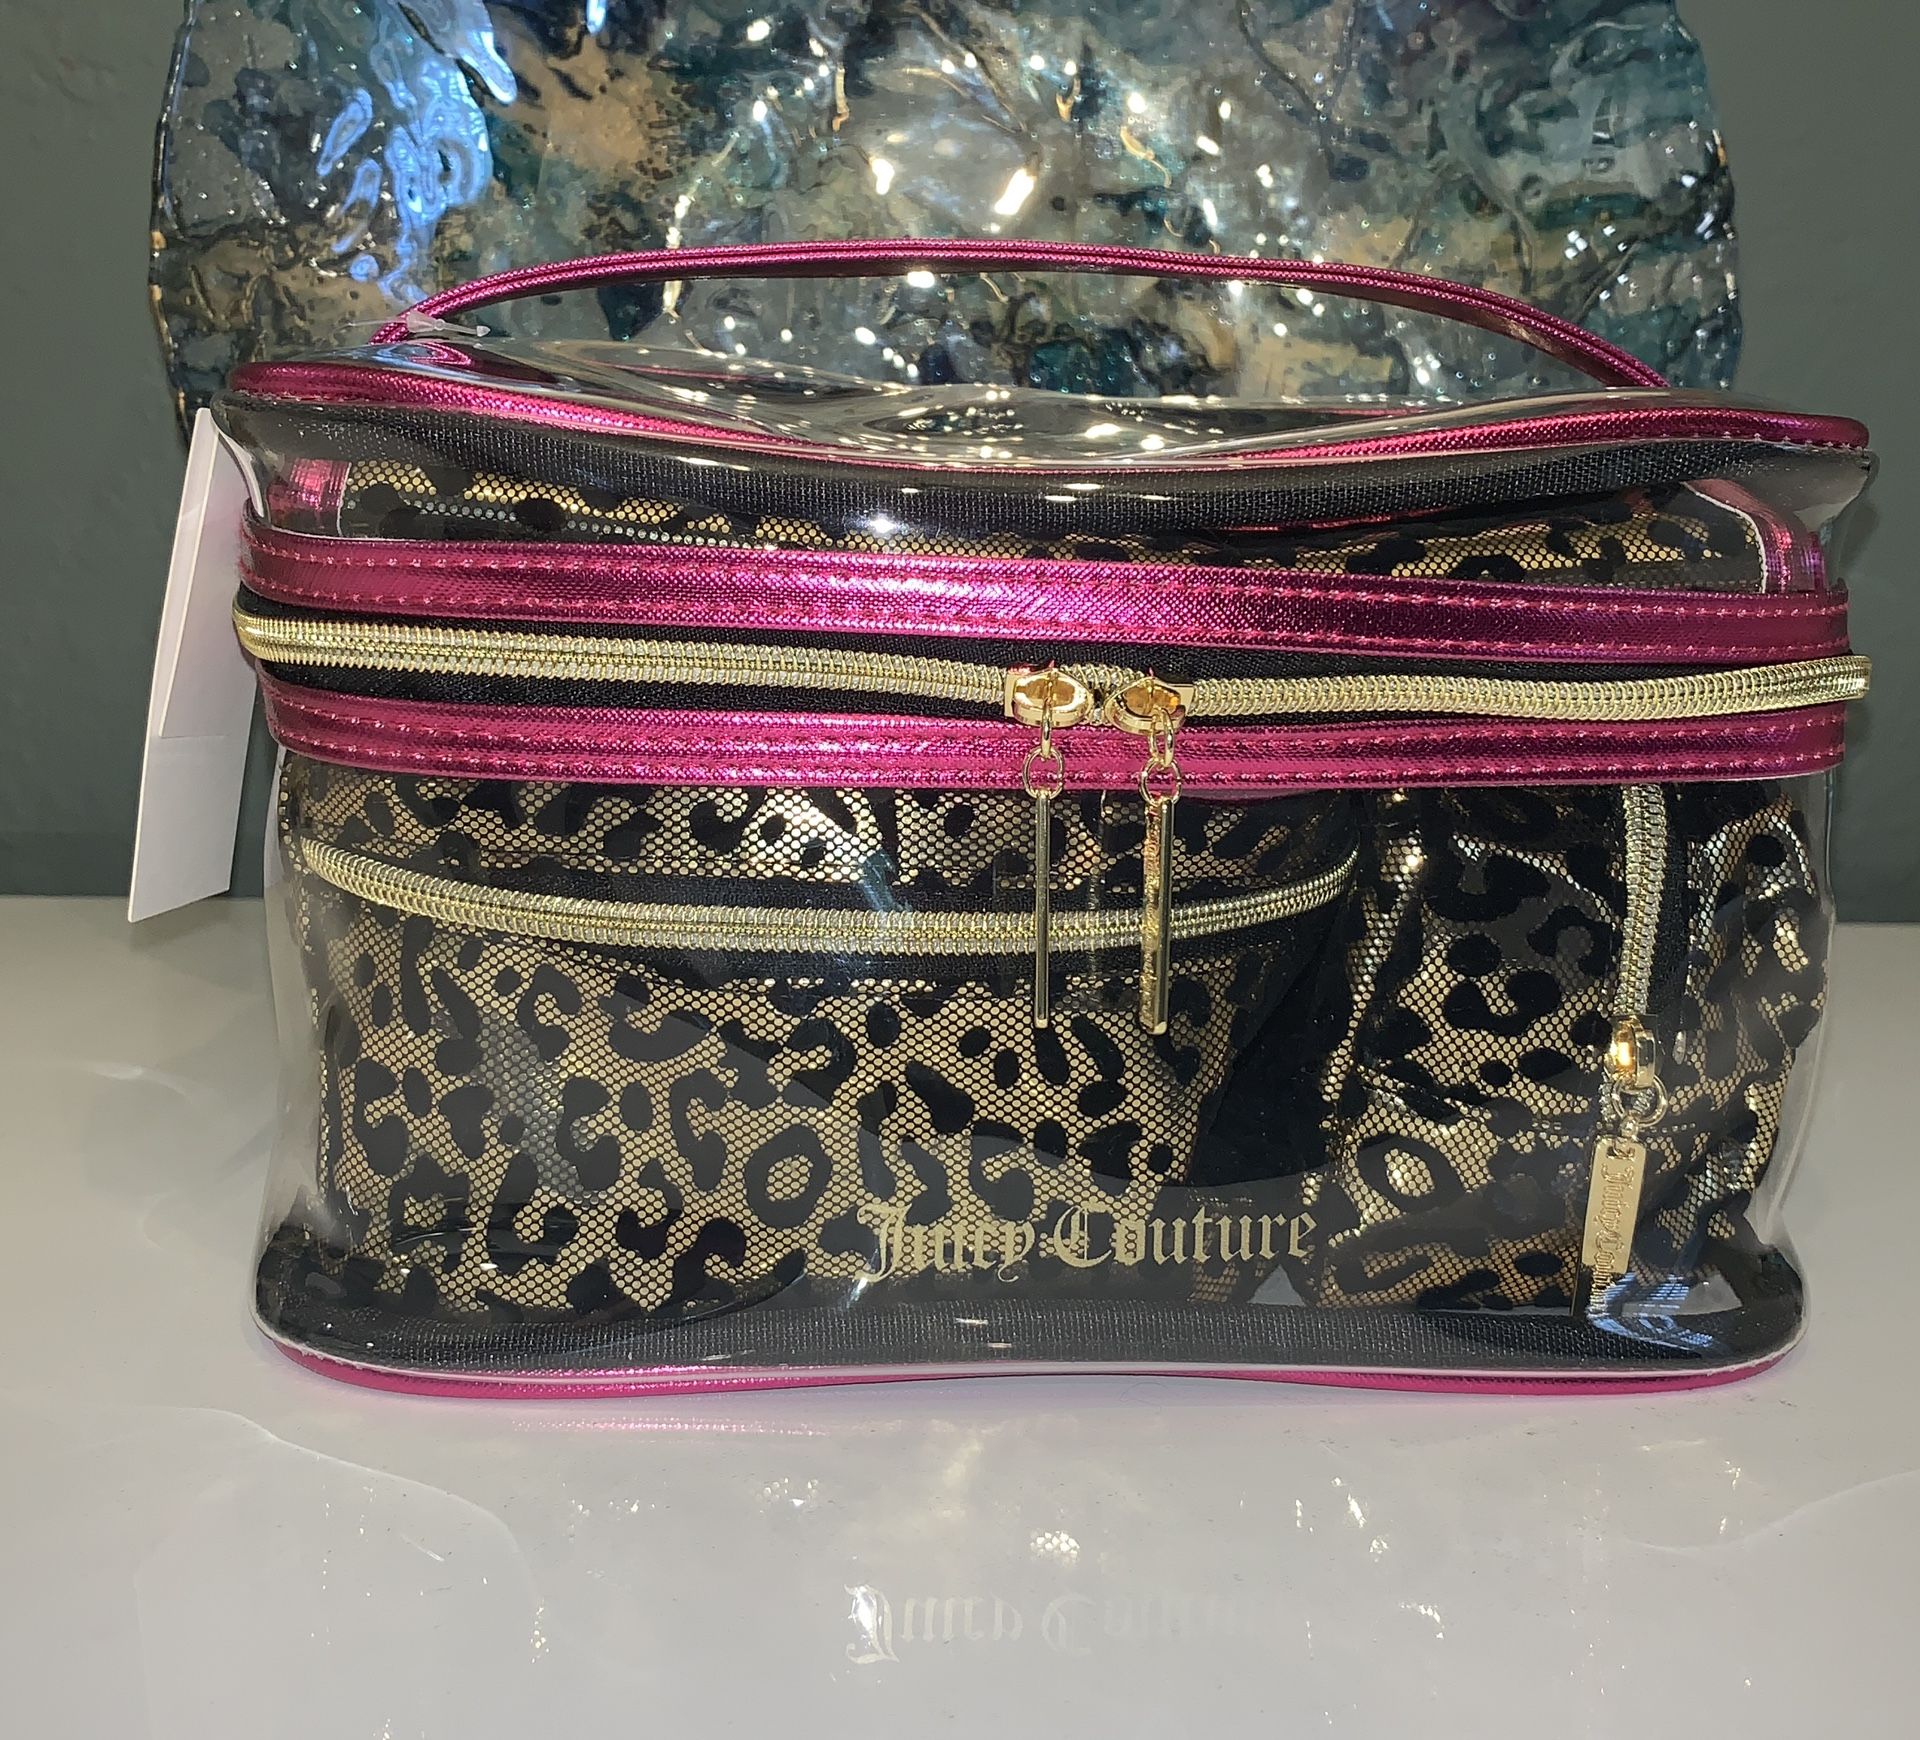 Large Juicy Couture Cosmetic Bag 4 Piece Clear Pink Cheetah